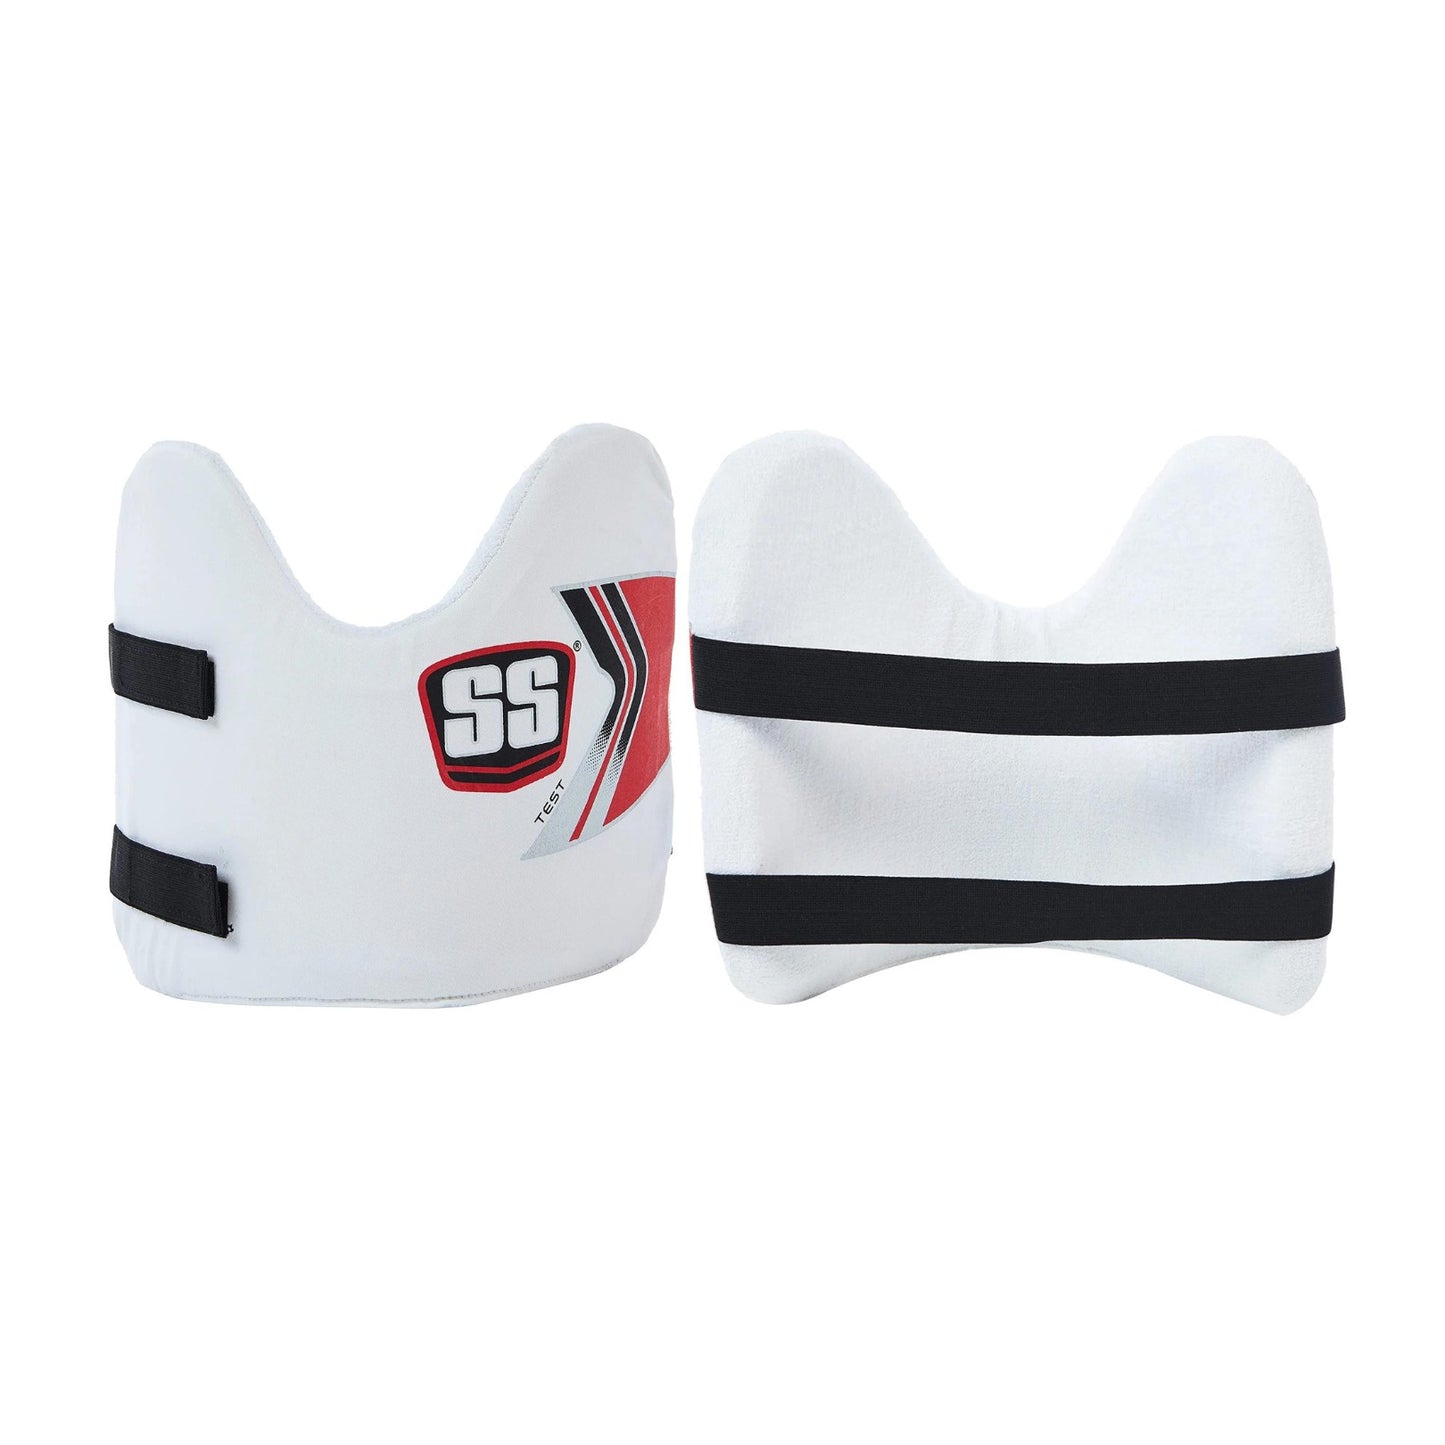 SS Chest Guard for Cricket TEST - Adult and Junior